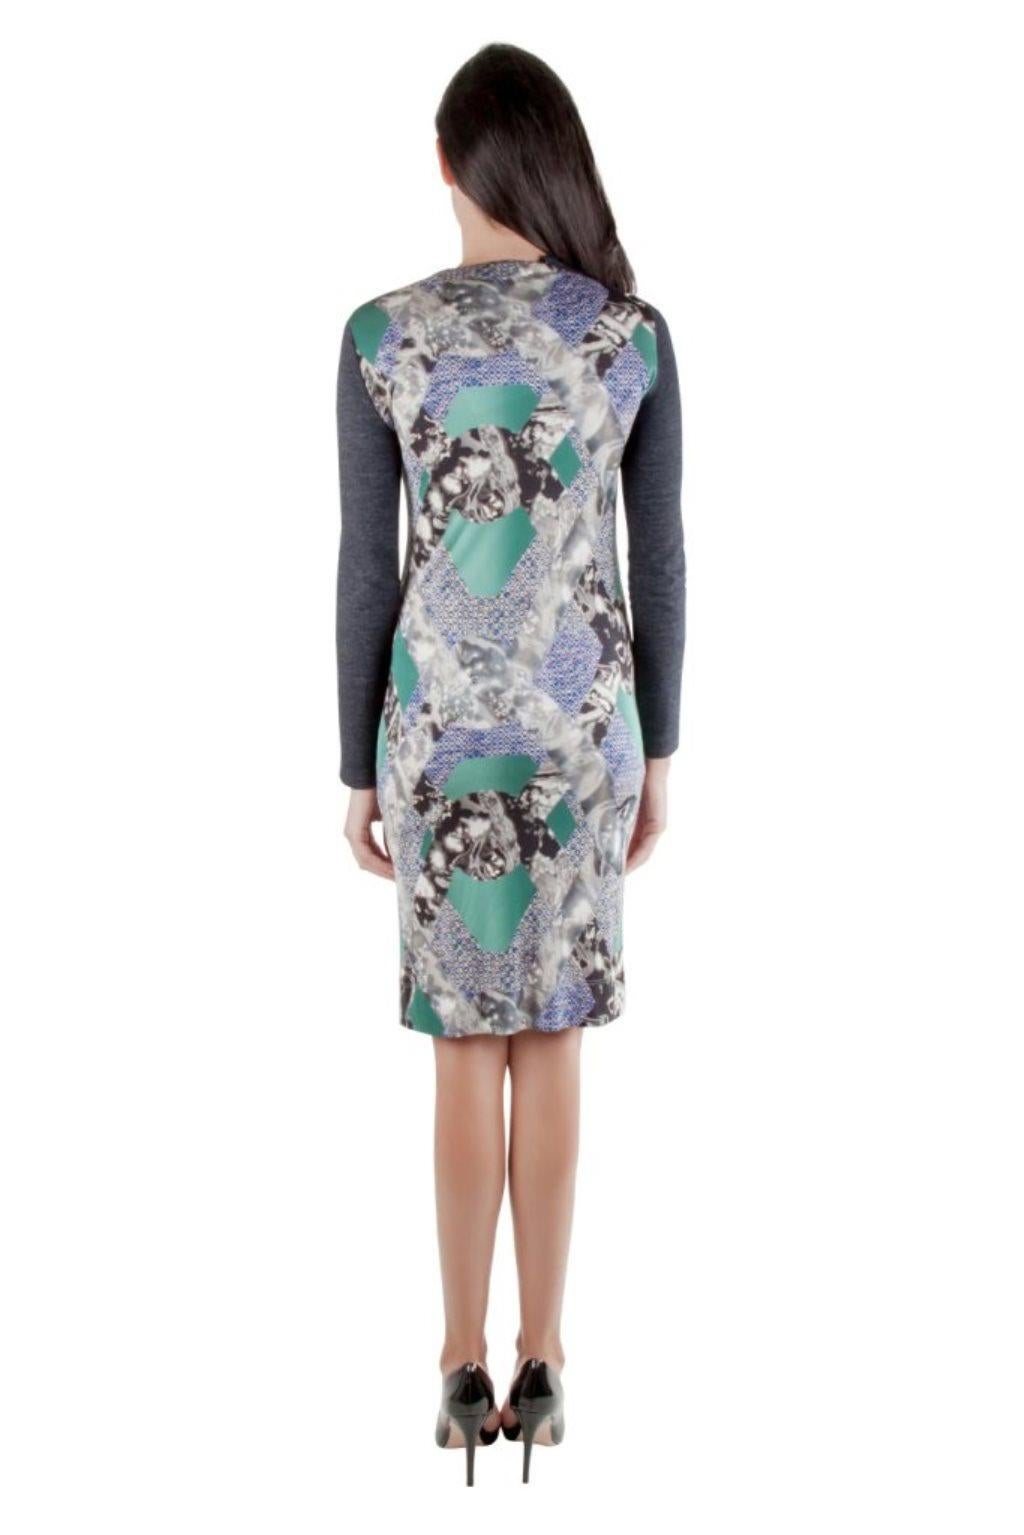 Constructed in an elegant shape with abstract prints, this Peter Pilotto dress has a comfortable fit. Complete with long sleeves, the dress will look great with pumps and sandals alike.

Includes: The Luxury Closet Packaging, Original Tag

